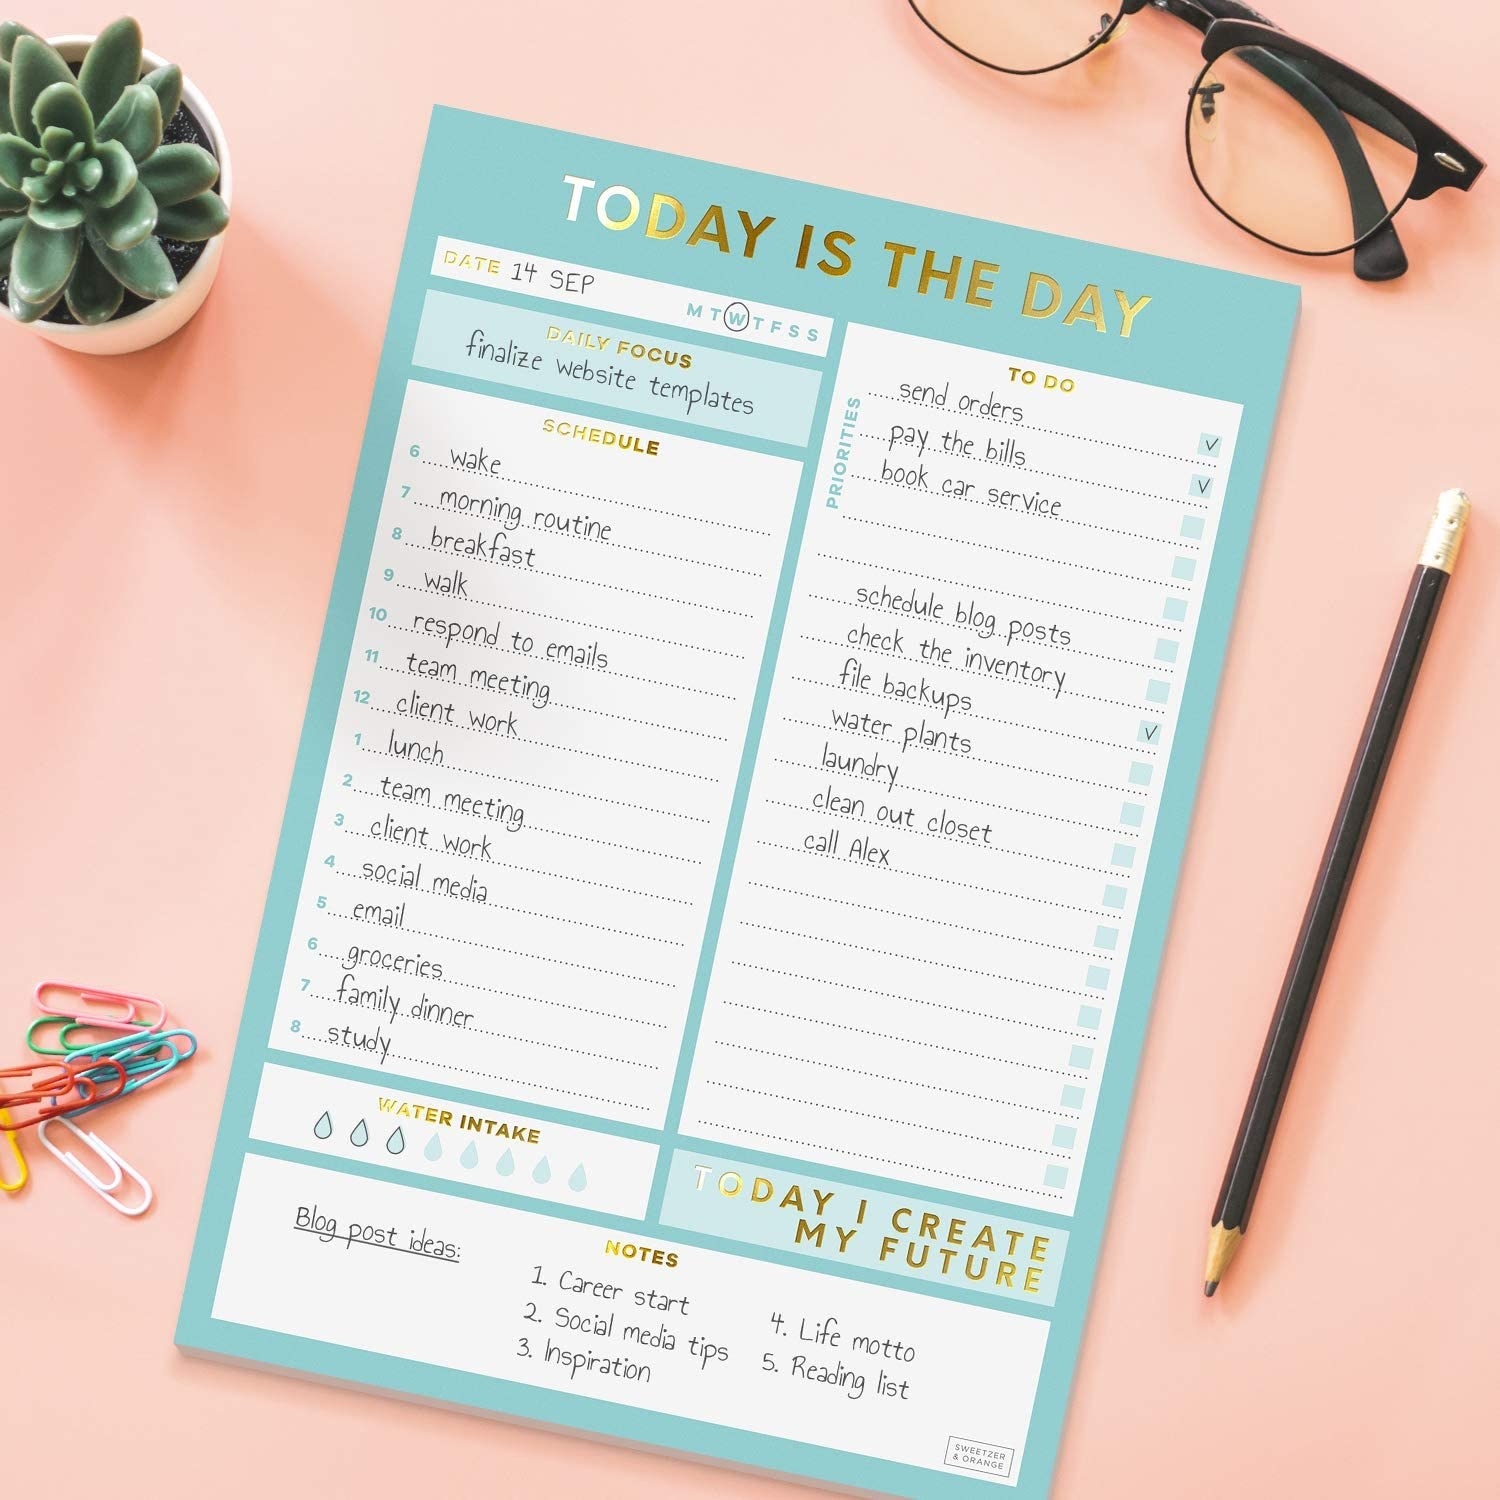 The to-do list on a table surrounded by stationery supplies